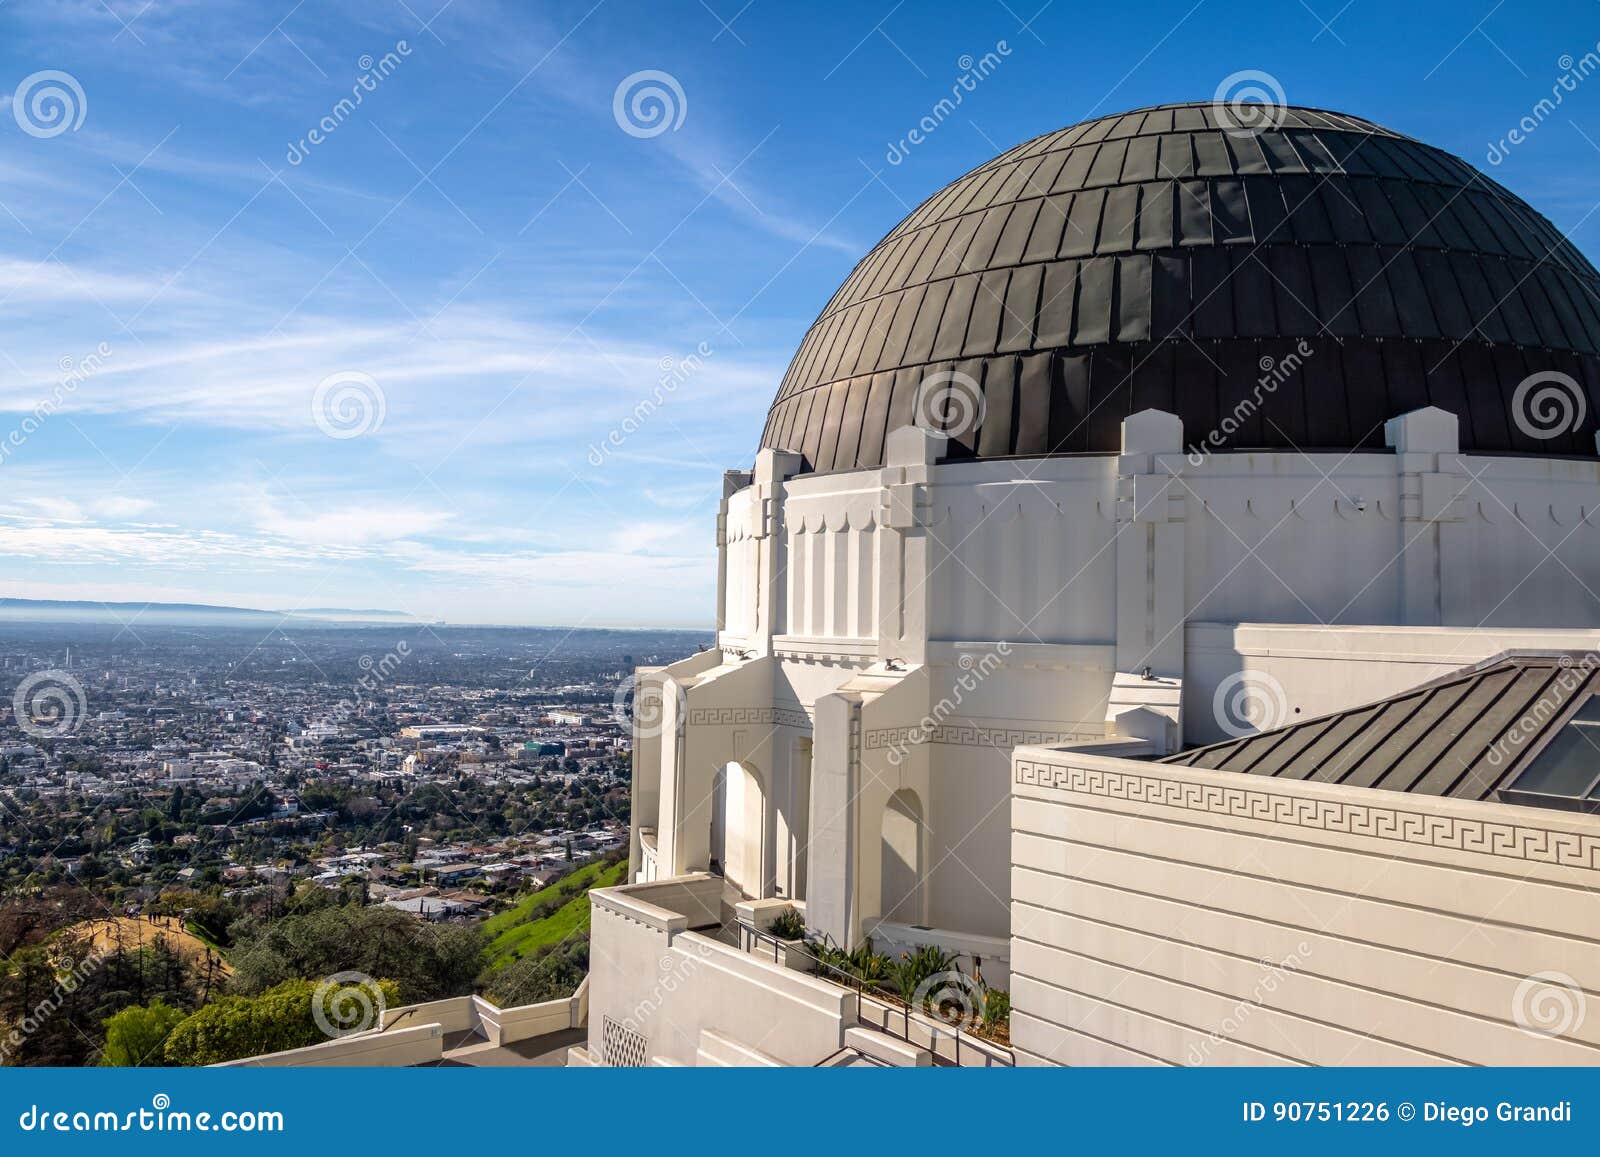 griffith observatory and city skyline - los angeles, california, usa